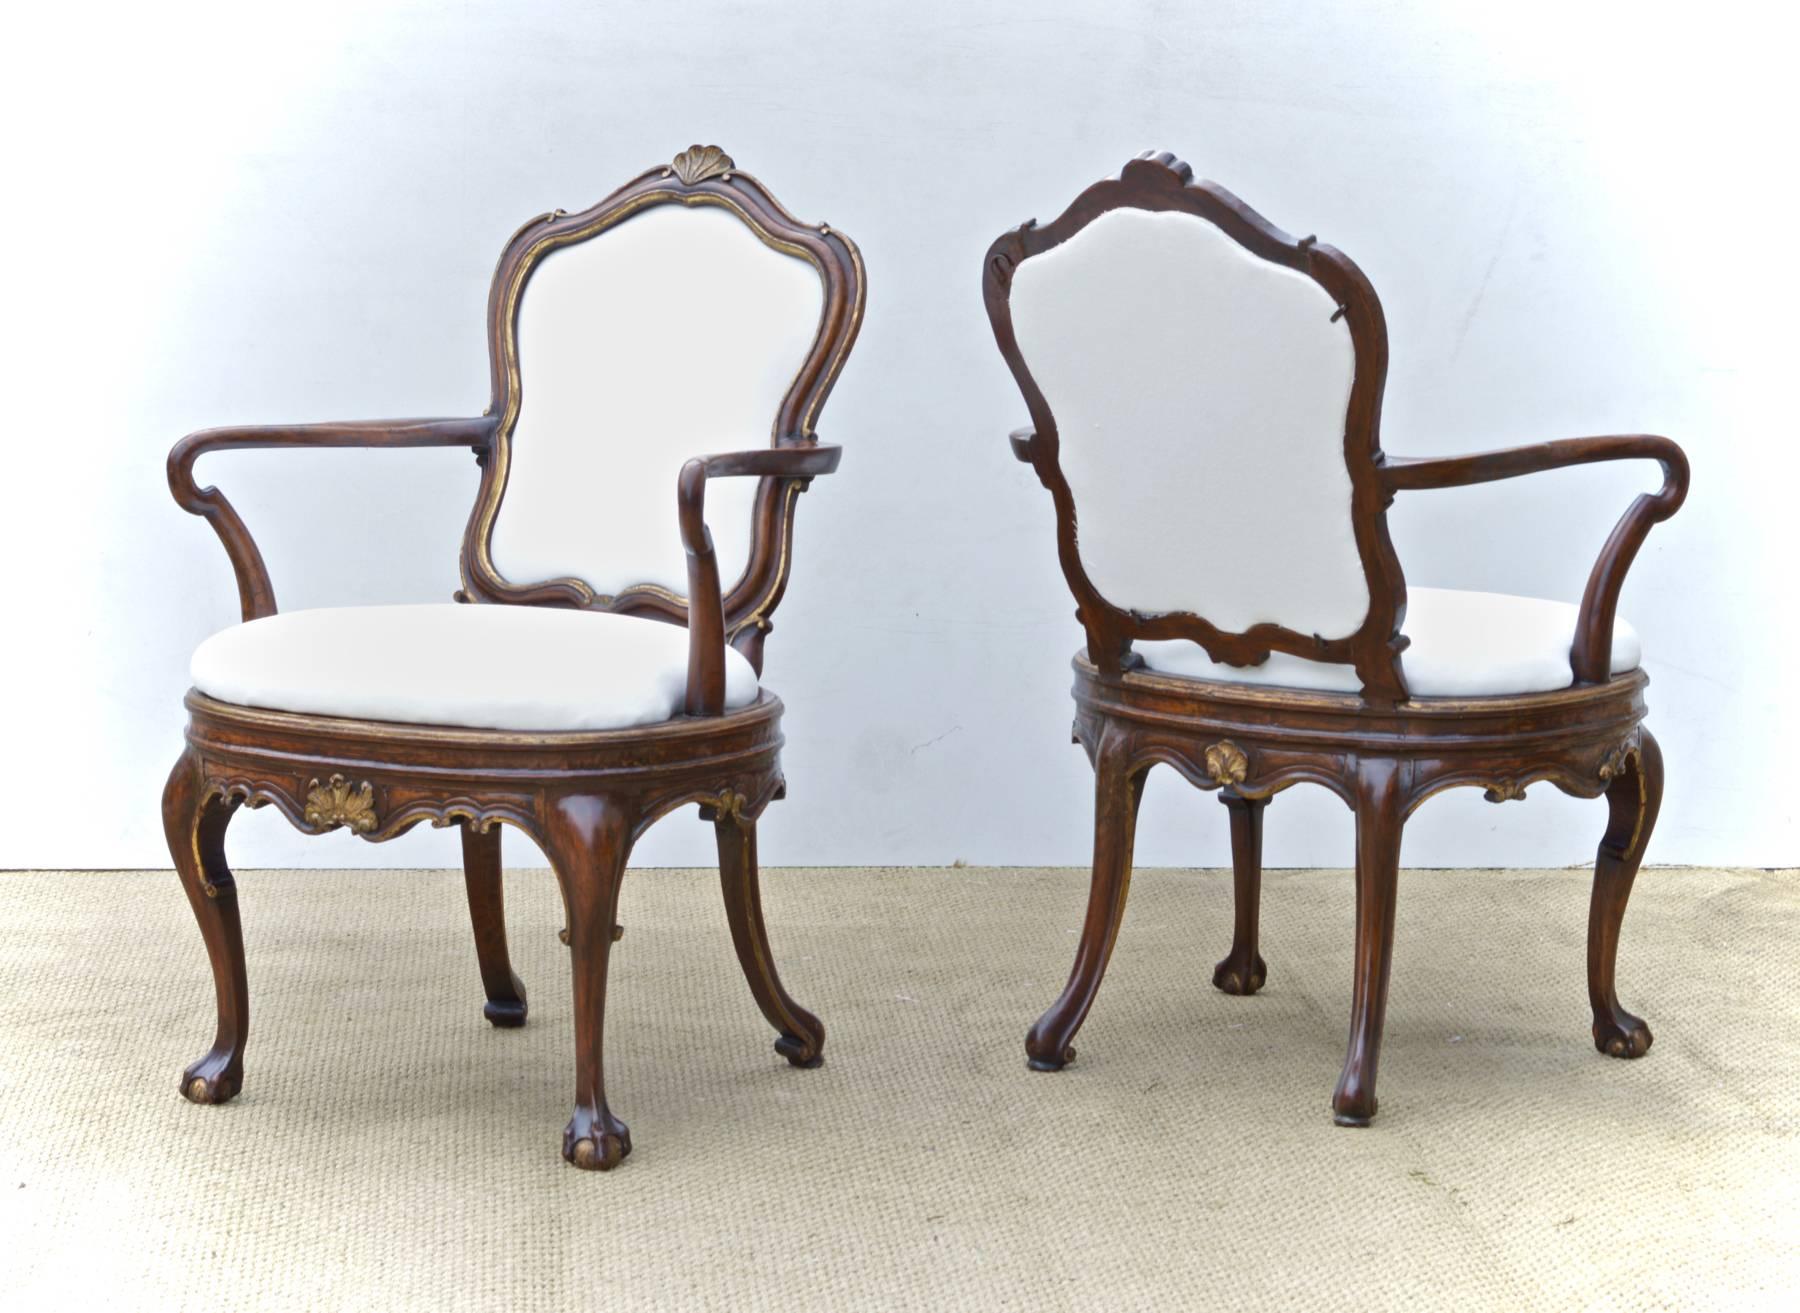 A spectacular pair of Italian walnut armchairs in the venetian taste with gorgeous parcel-gilt accents and captivating ball and claw feet. The late 19th century chairs have just been simply upholstered in white duck. Nice sitting chairs. Both are